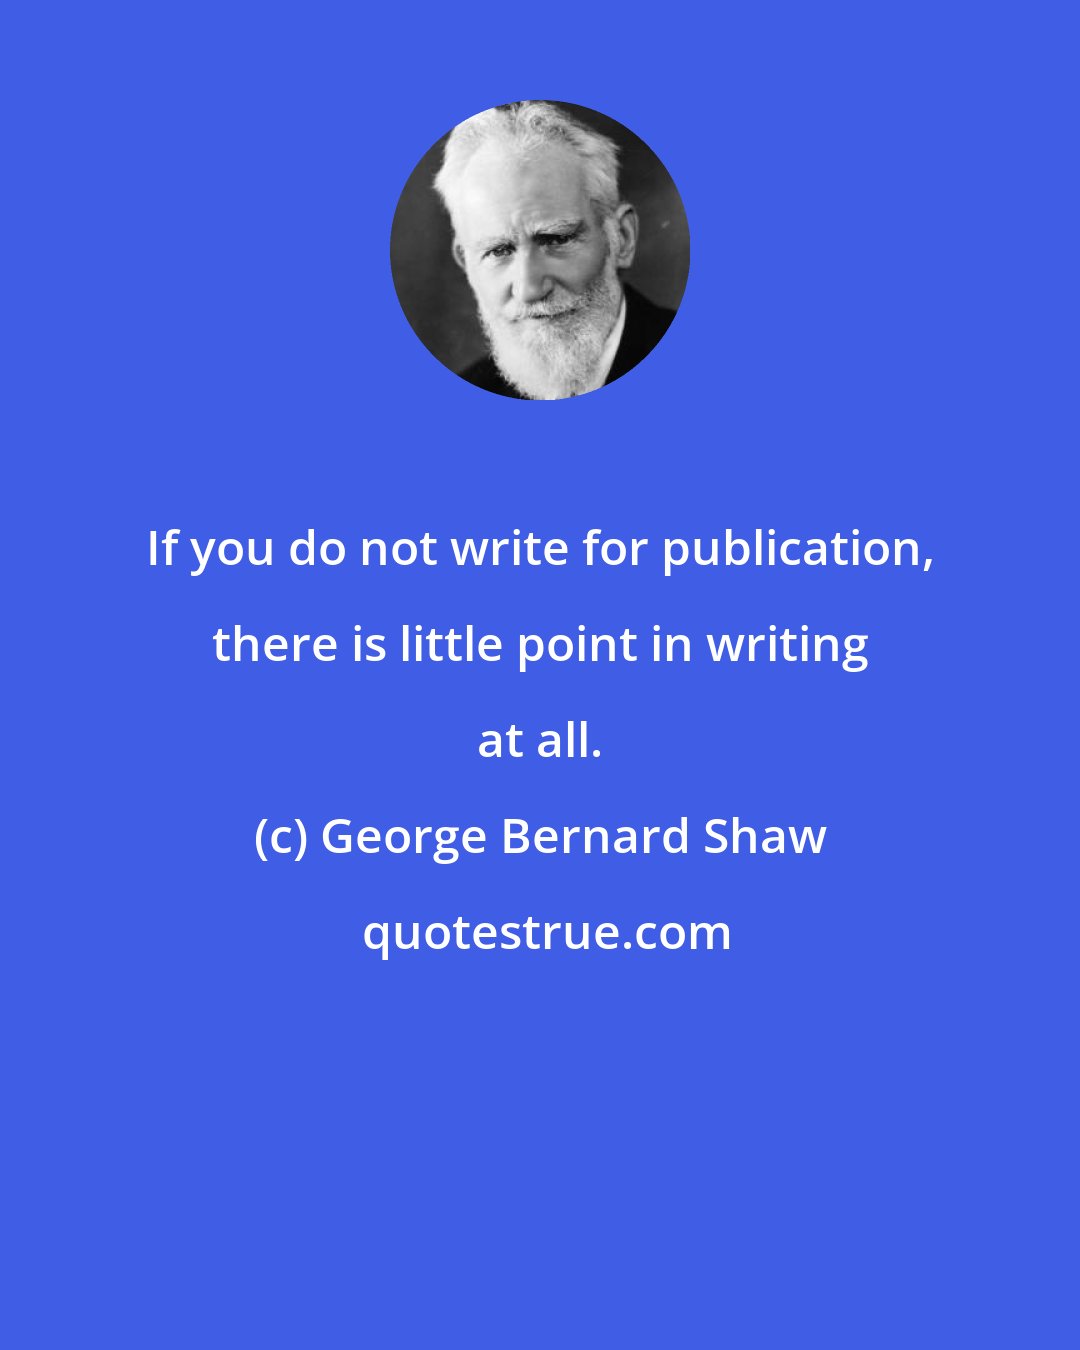 George Bernard Shaw: If you do not write for publication, there is little point in writing at all.